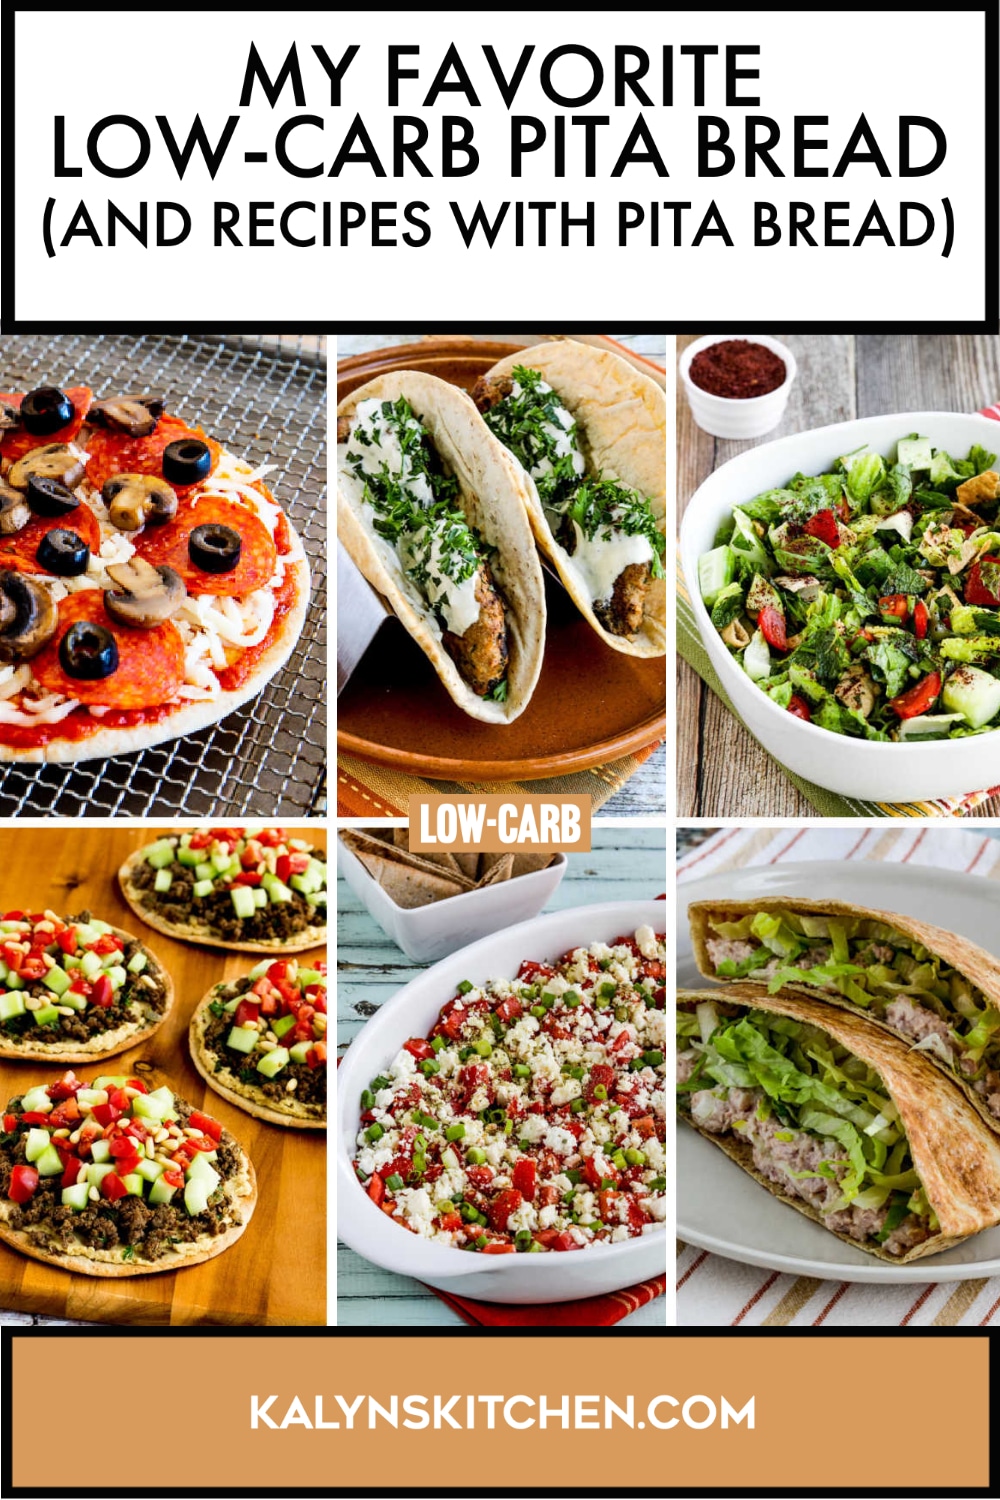 Pinterest image of My Favorite Low-Carb Pita Bread (and Recipes with Pita Bread)